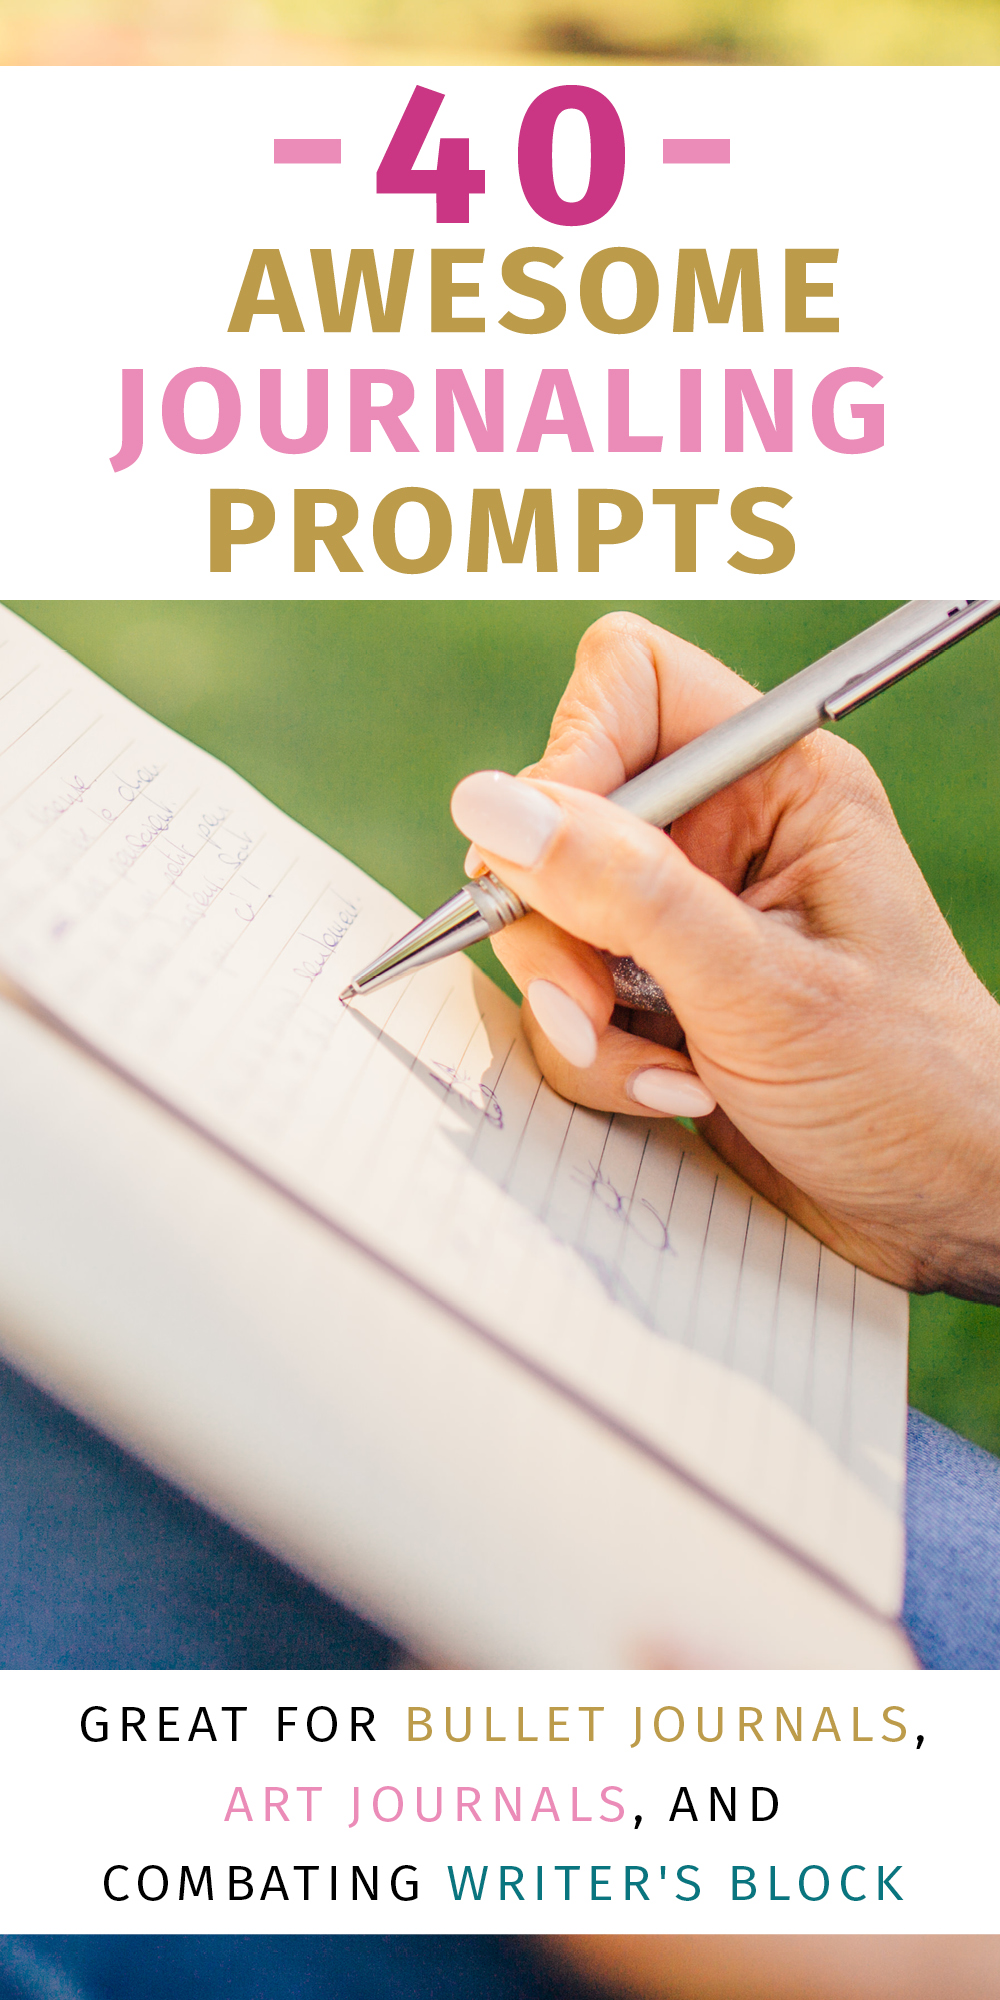 I love these journaling prompts, especially the ones with ideas of what to write and doodle in my bullet journal! A great list for bullet journaling, art journaling, and for those time when writer's block hits. Using these for my next creative retreat! :)